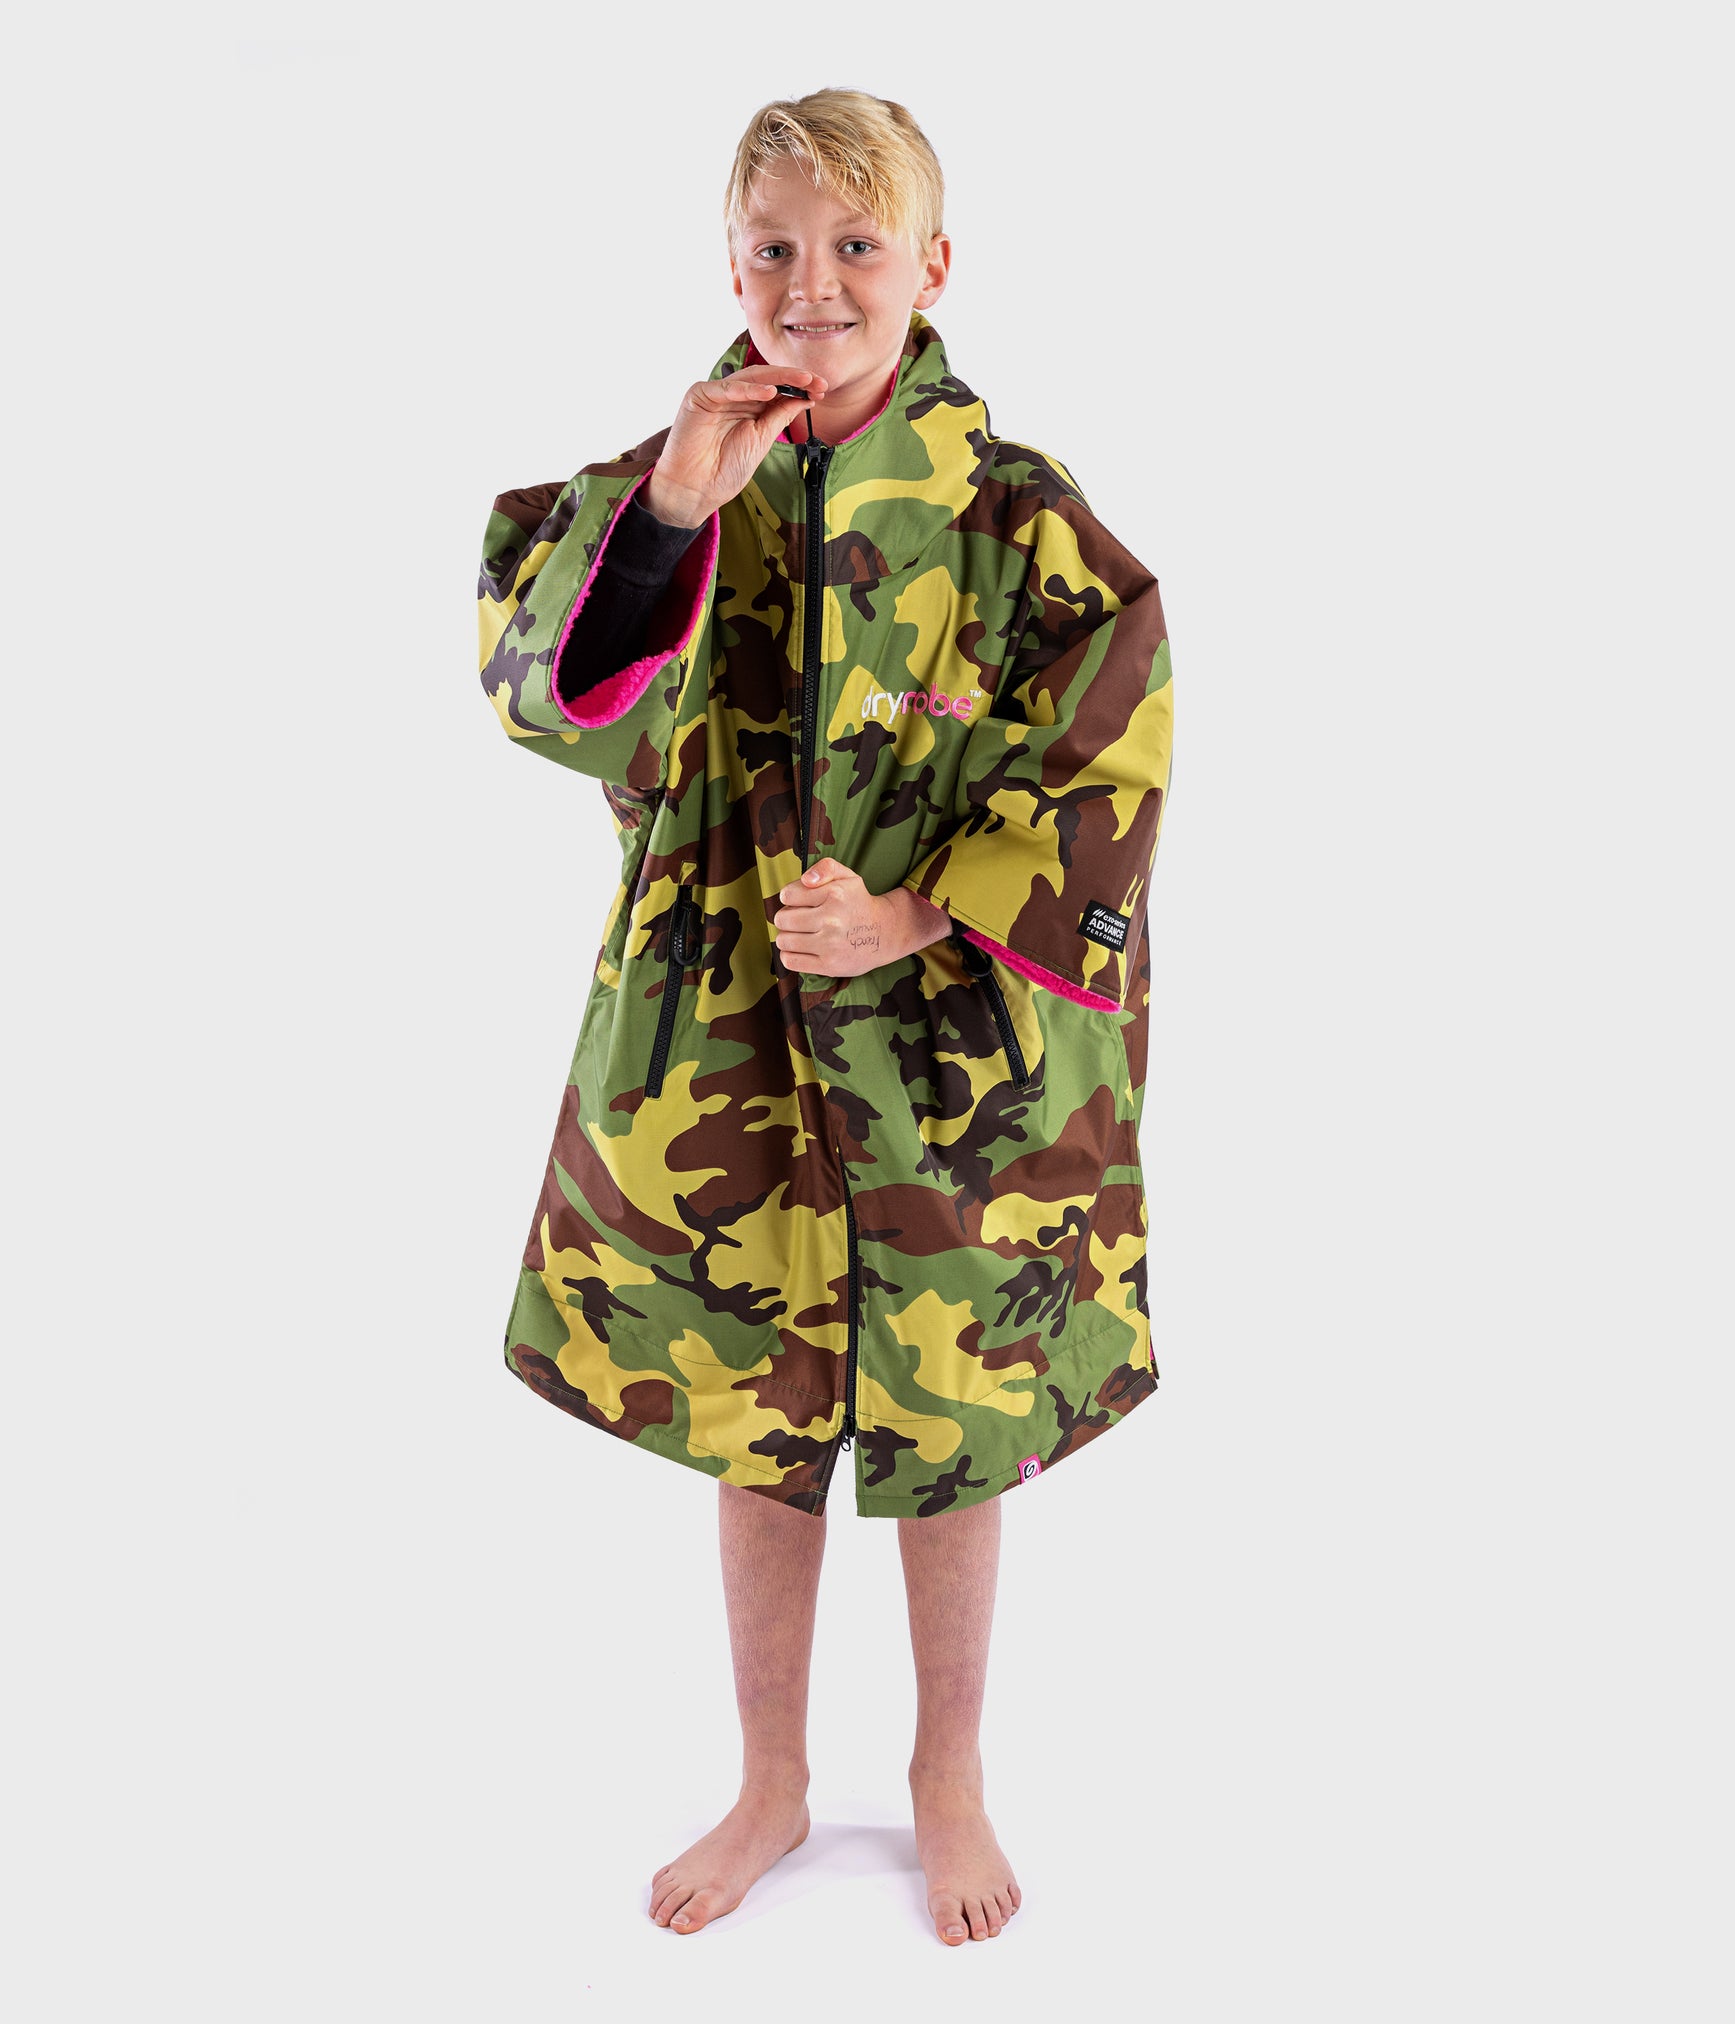 Kids dryrobe Advance Short Sleeve Camo Waterproof Outer with Pink Fleece Lining Changing Robe